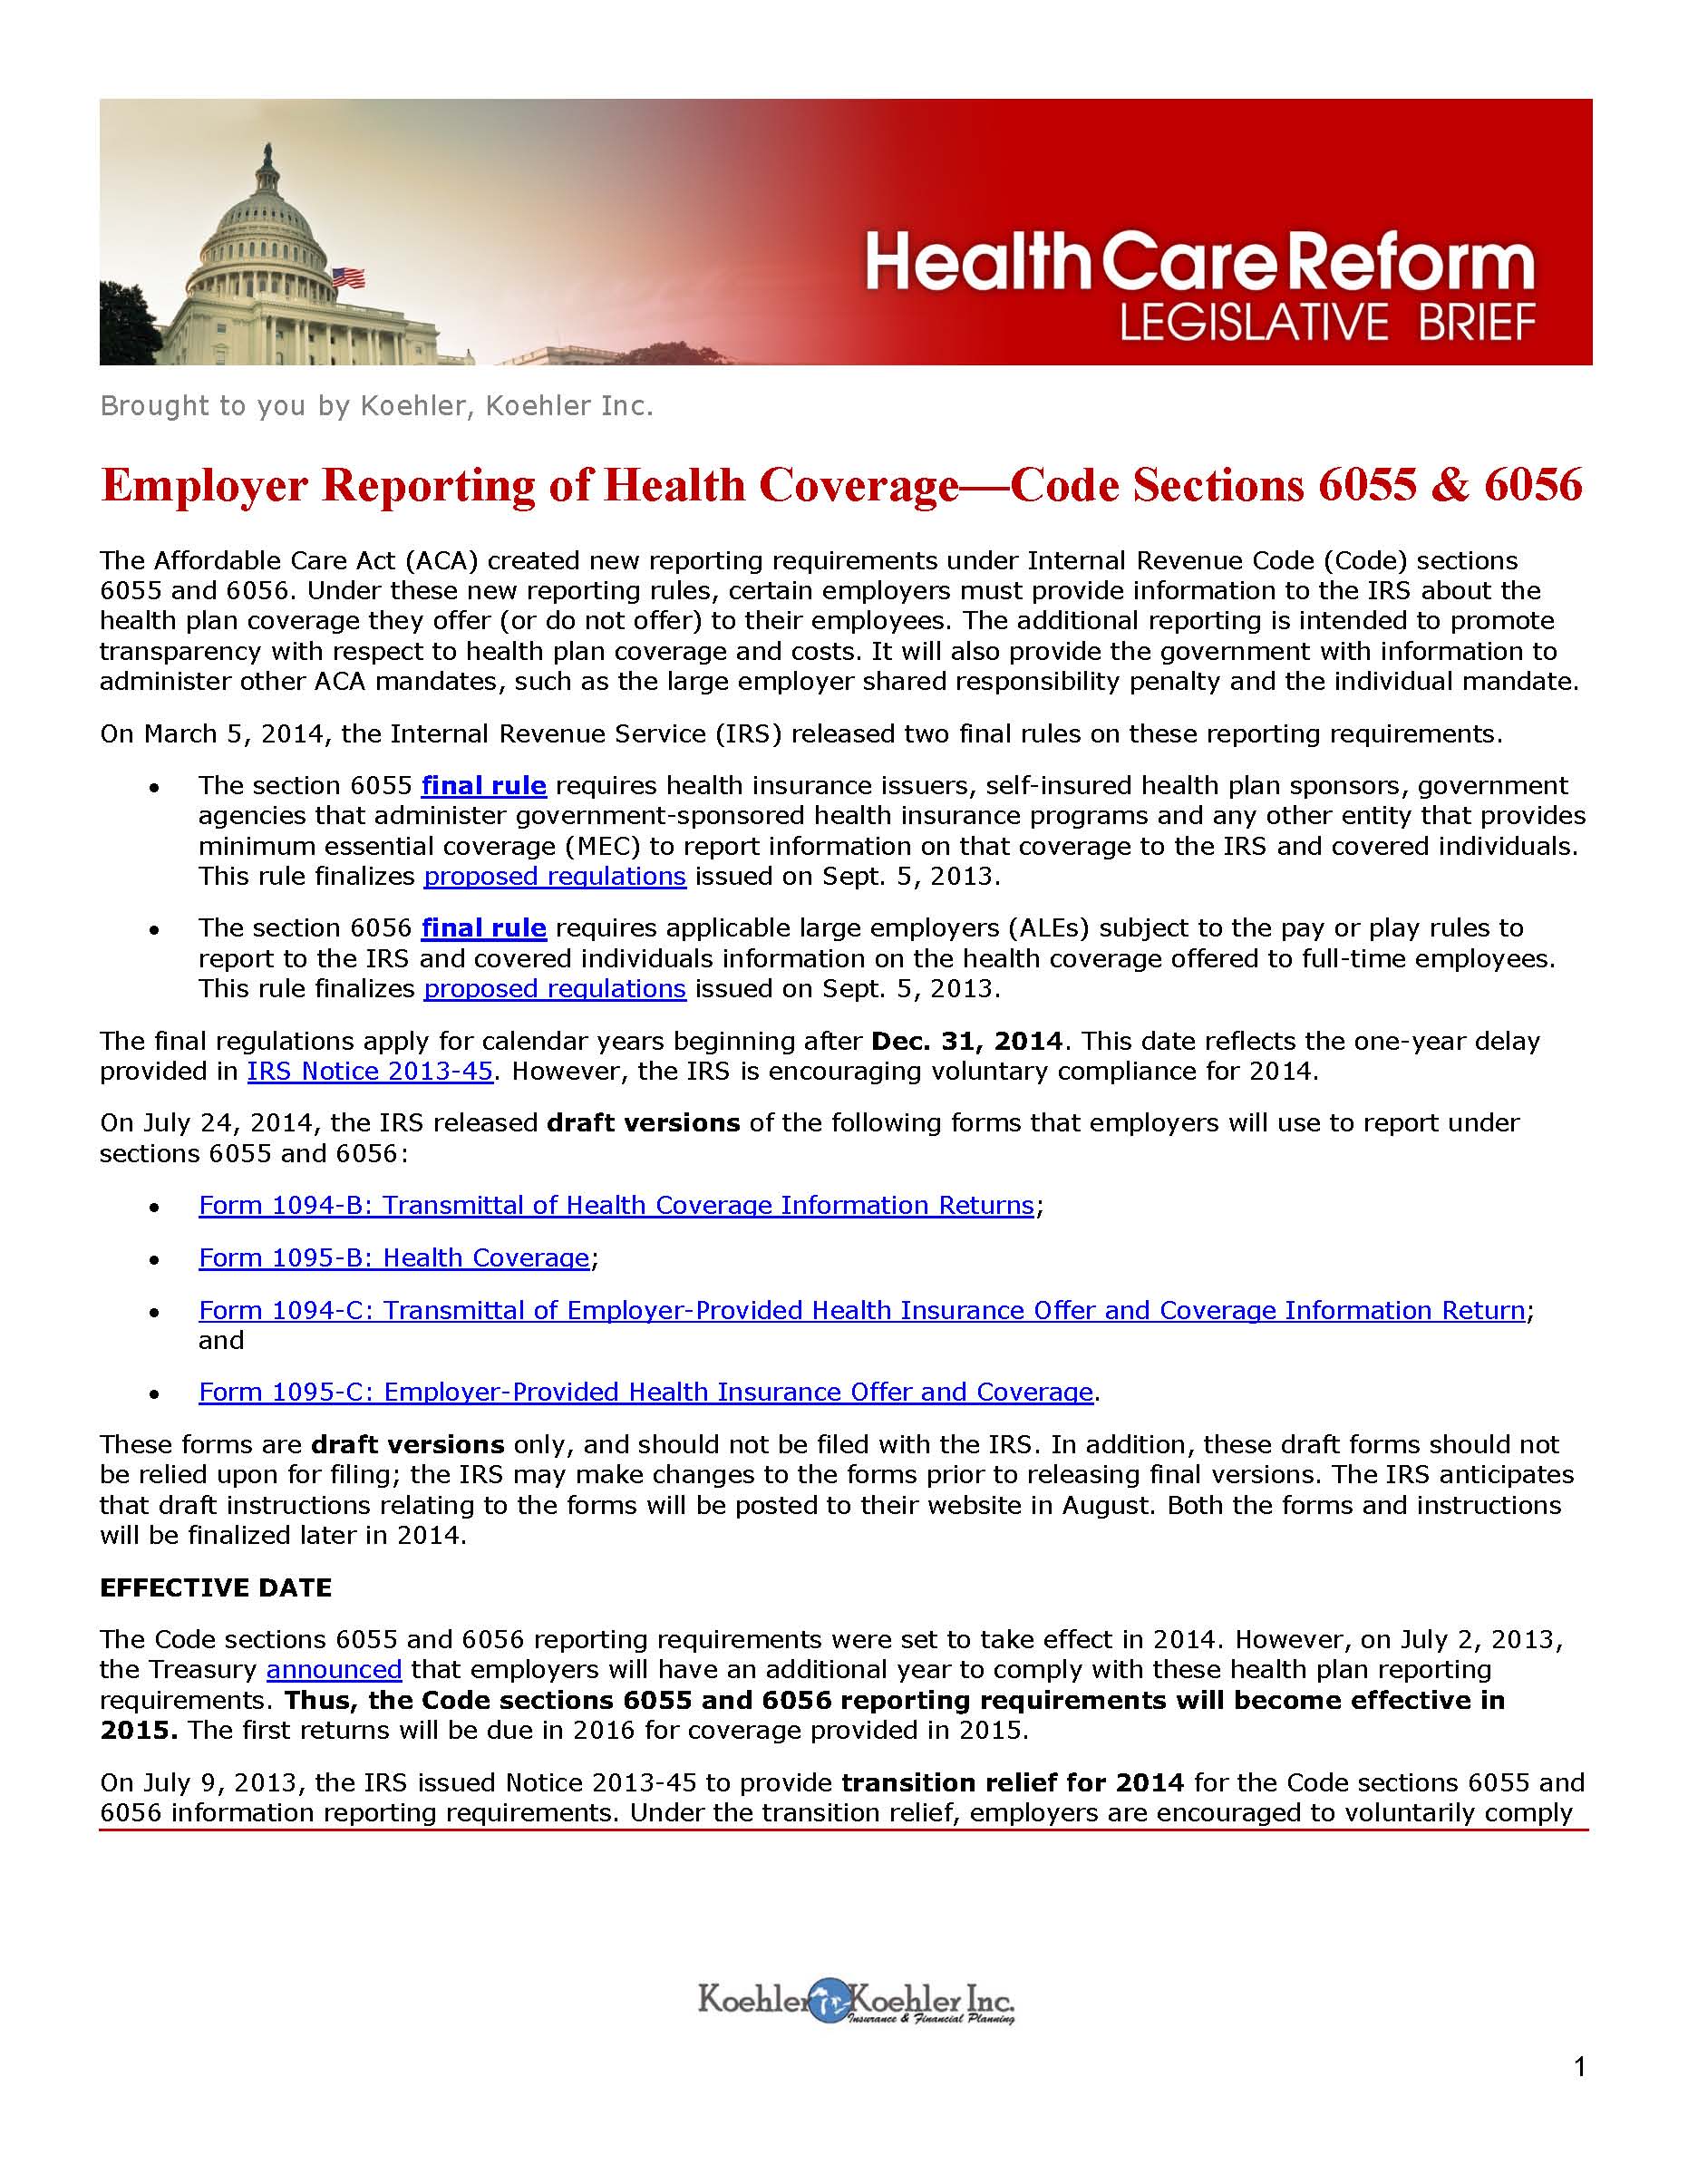 87167 HCR Employer Reporting of Health Coverage - Code Sections 6055 and 6056 7-30-14_Page_01